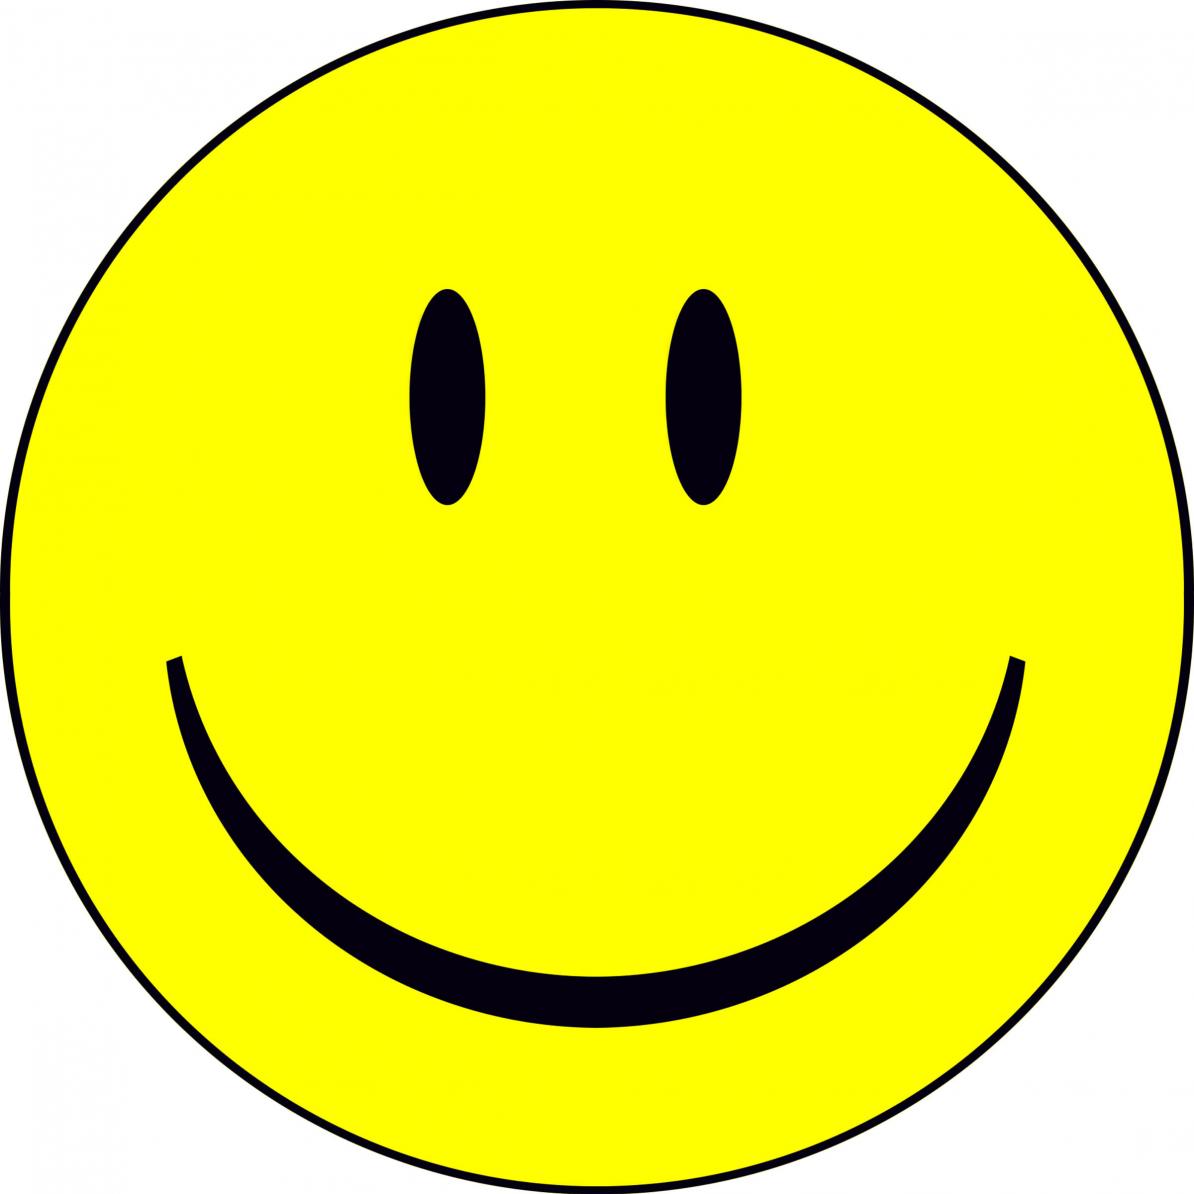 Kid Smile Clipart - Free Clipart Images